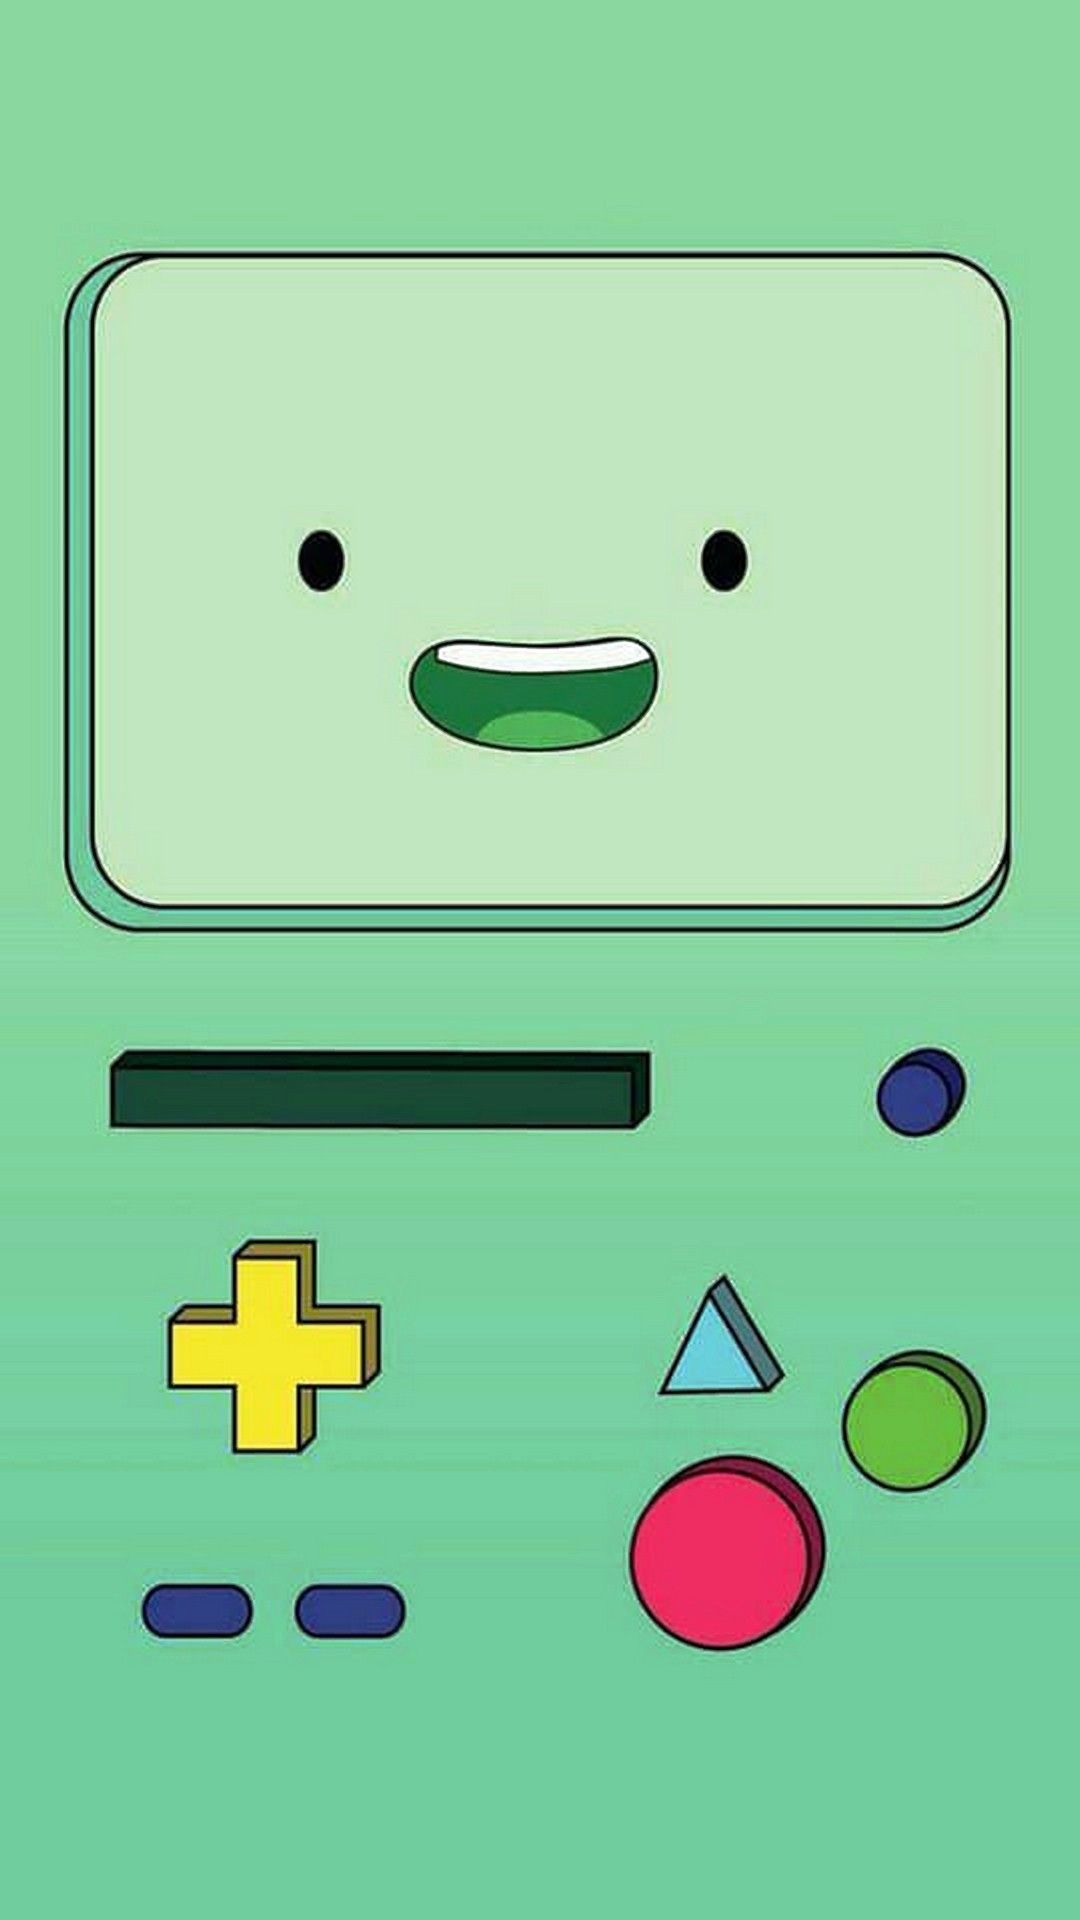 Adventure Time BMO wallpaper for iPhone and Android. - Adventure Time